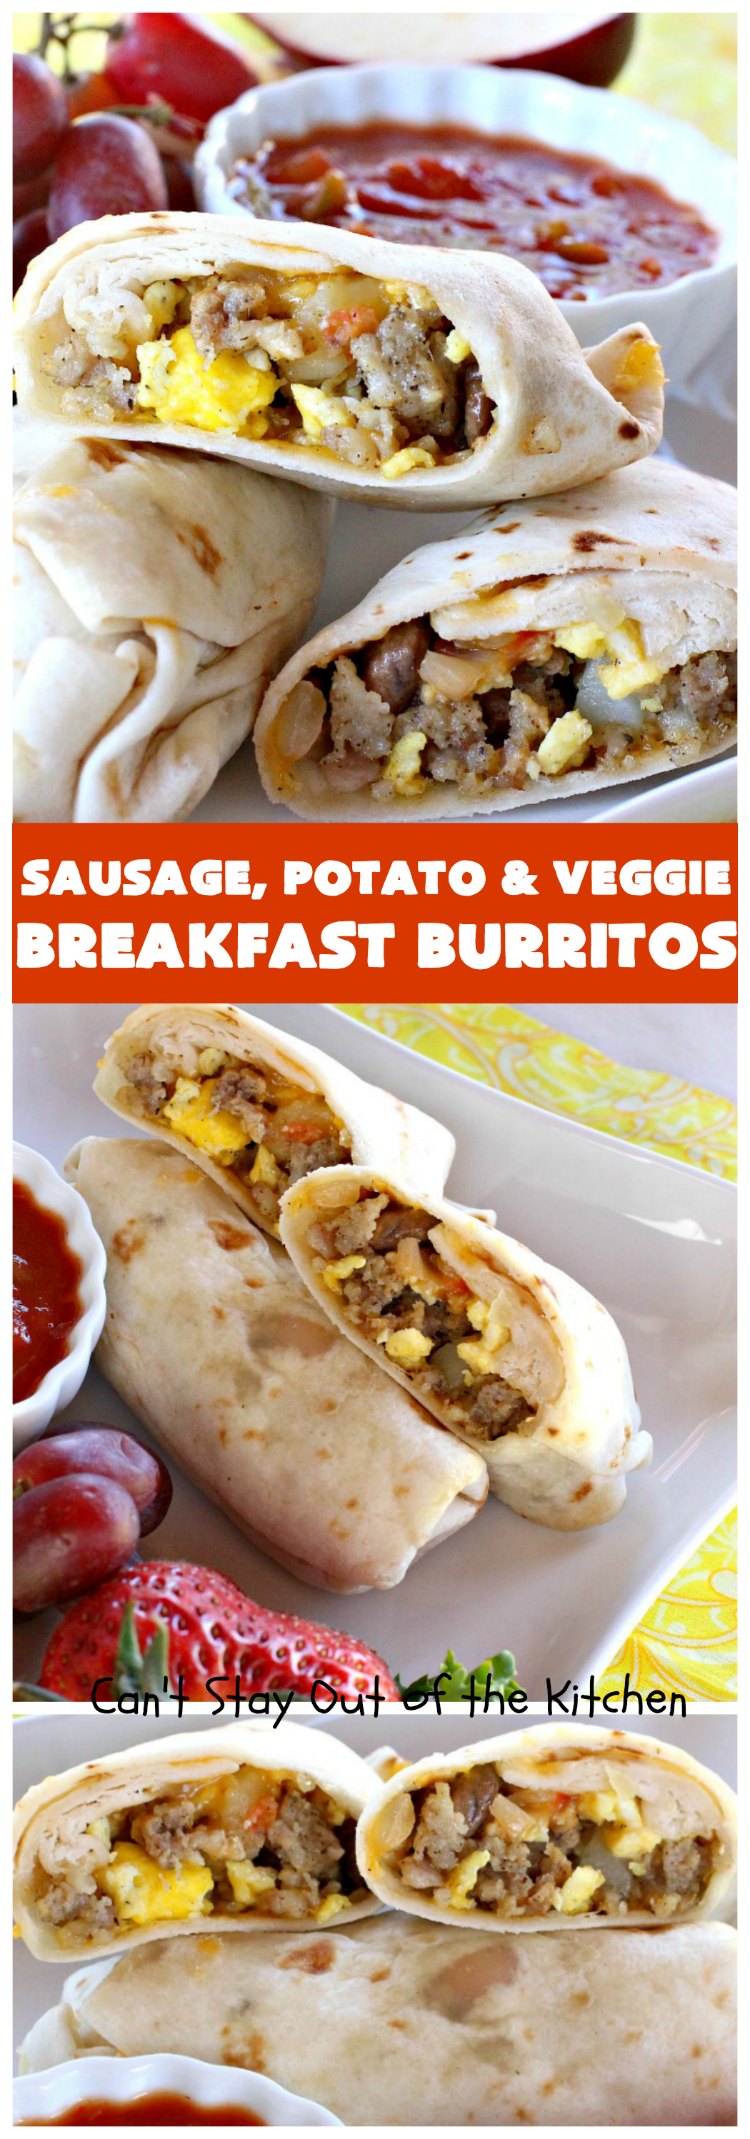 Sausage, Potato and Veggie Breakfast Burritos | Can't Stay Out of the Kitchen